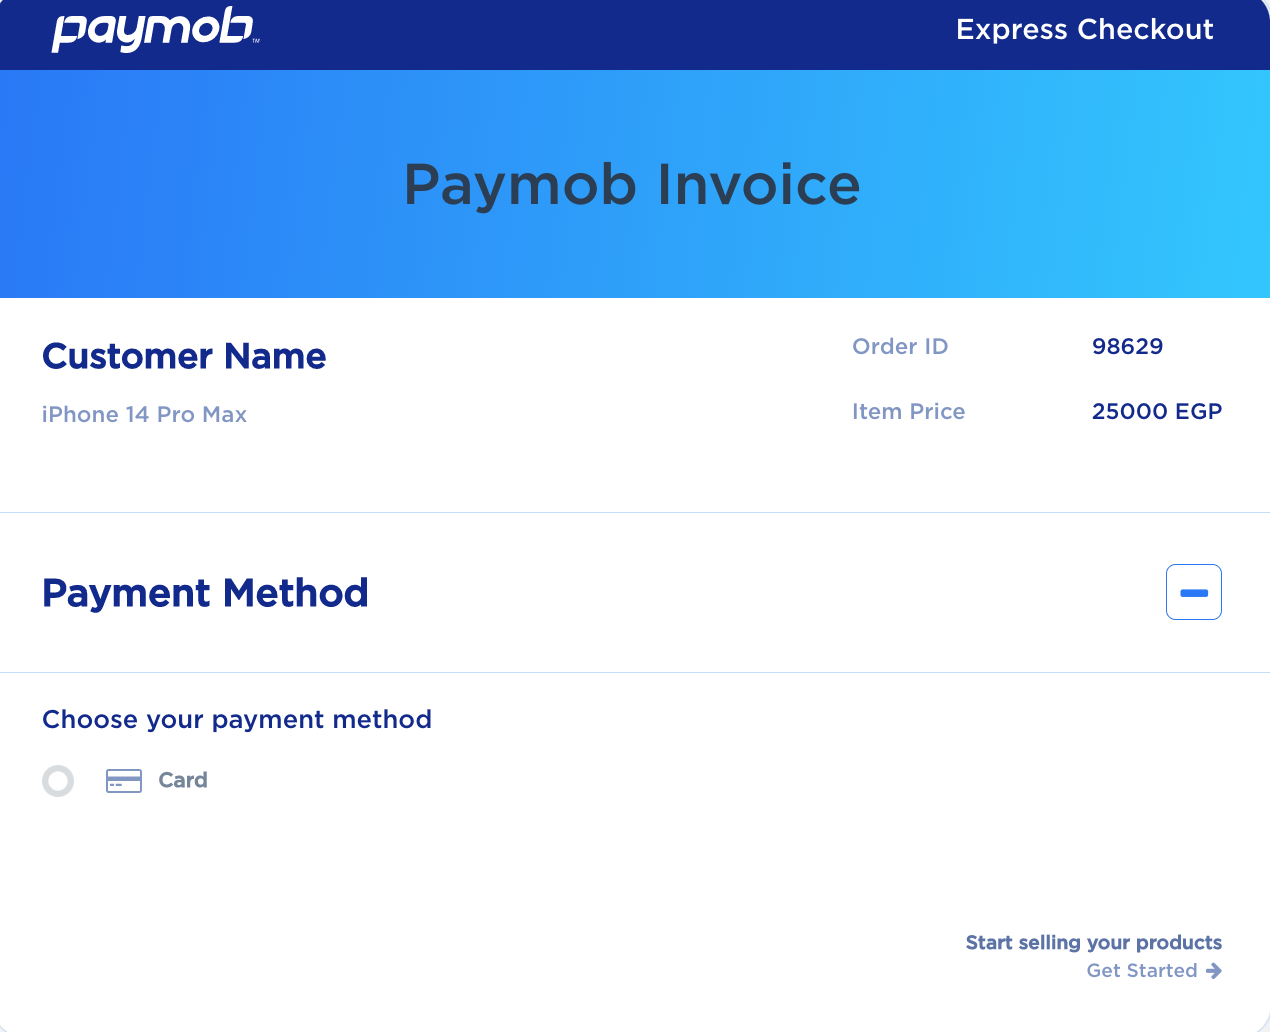 Accept dashboard - Invoice Pay.